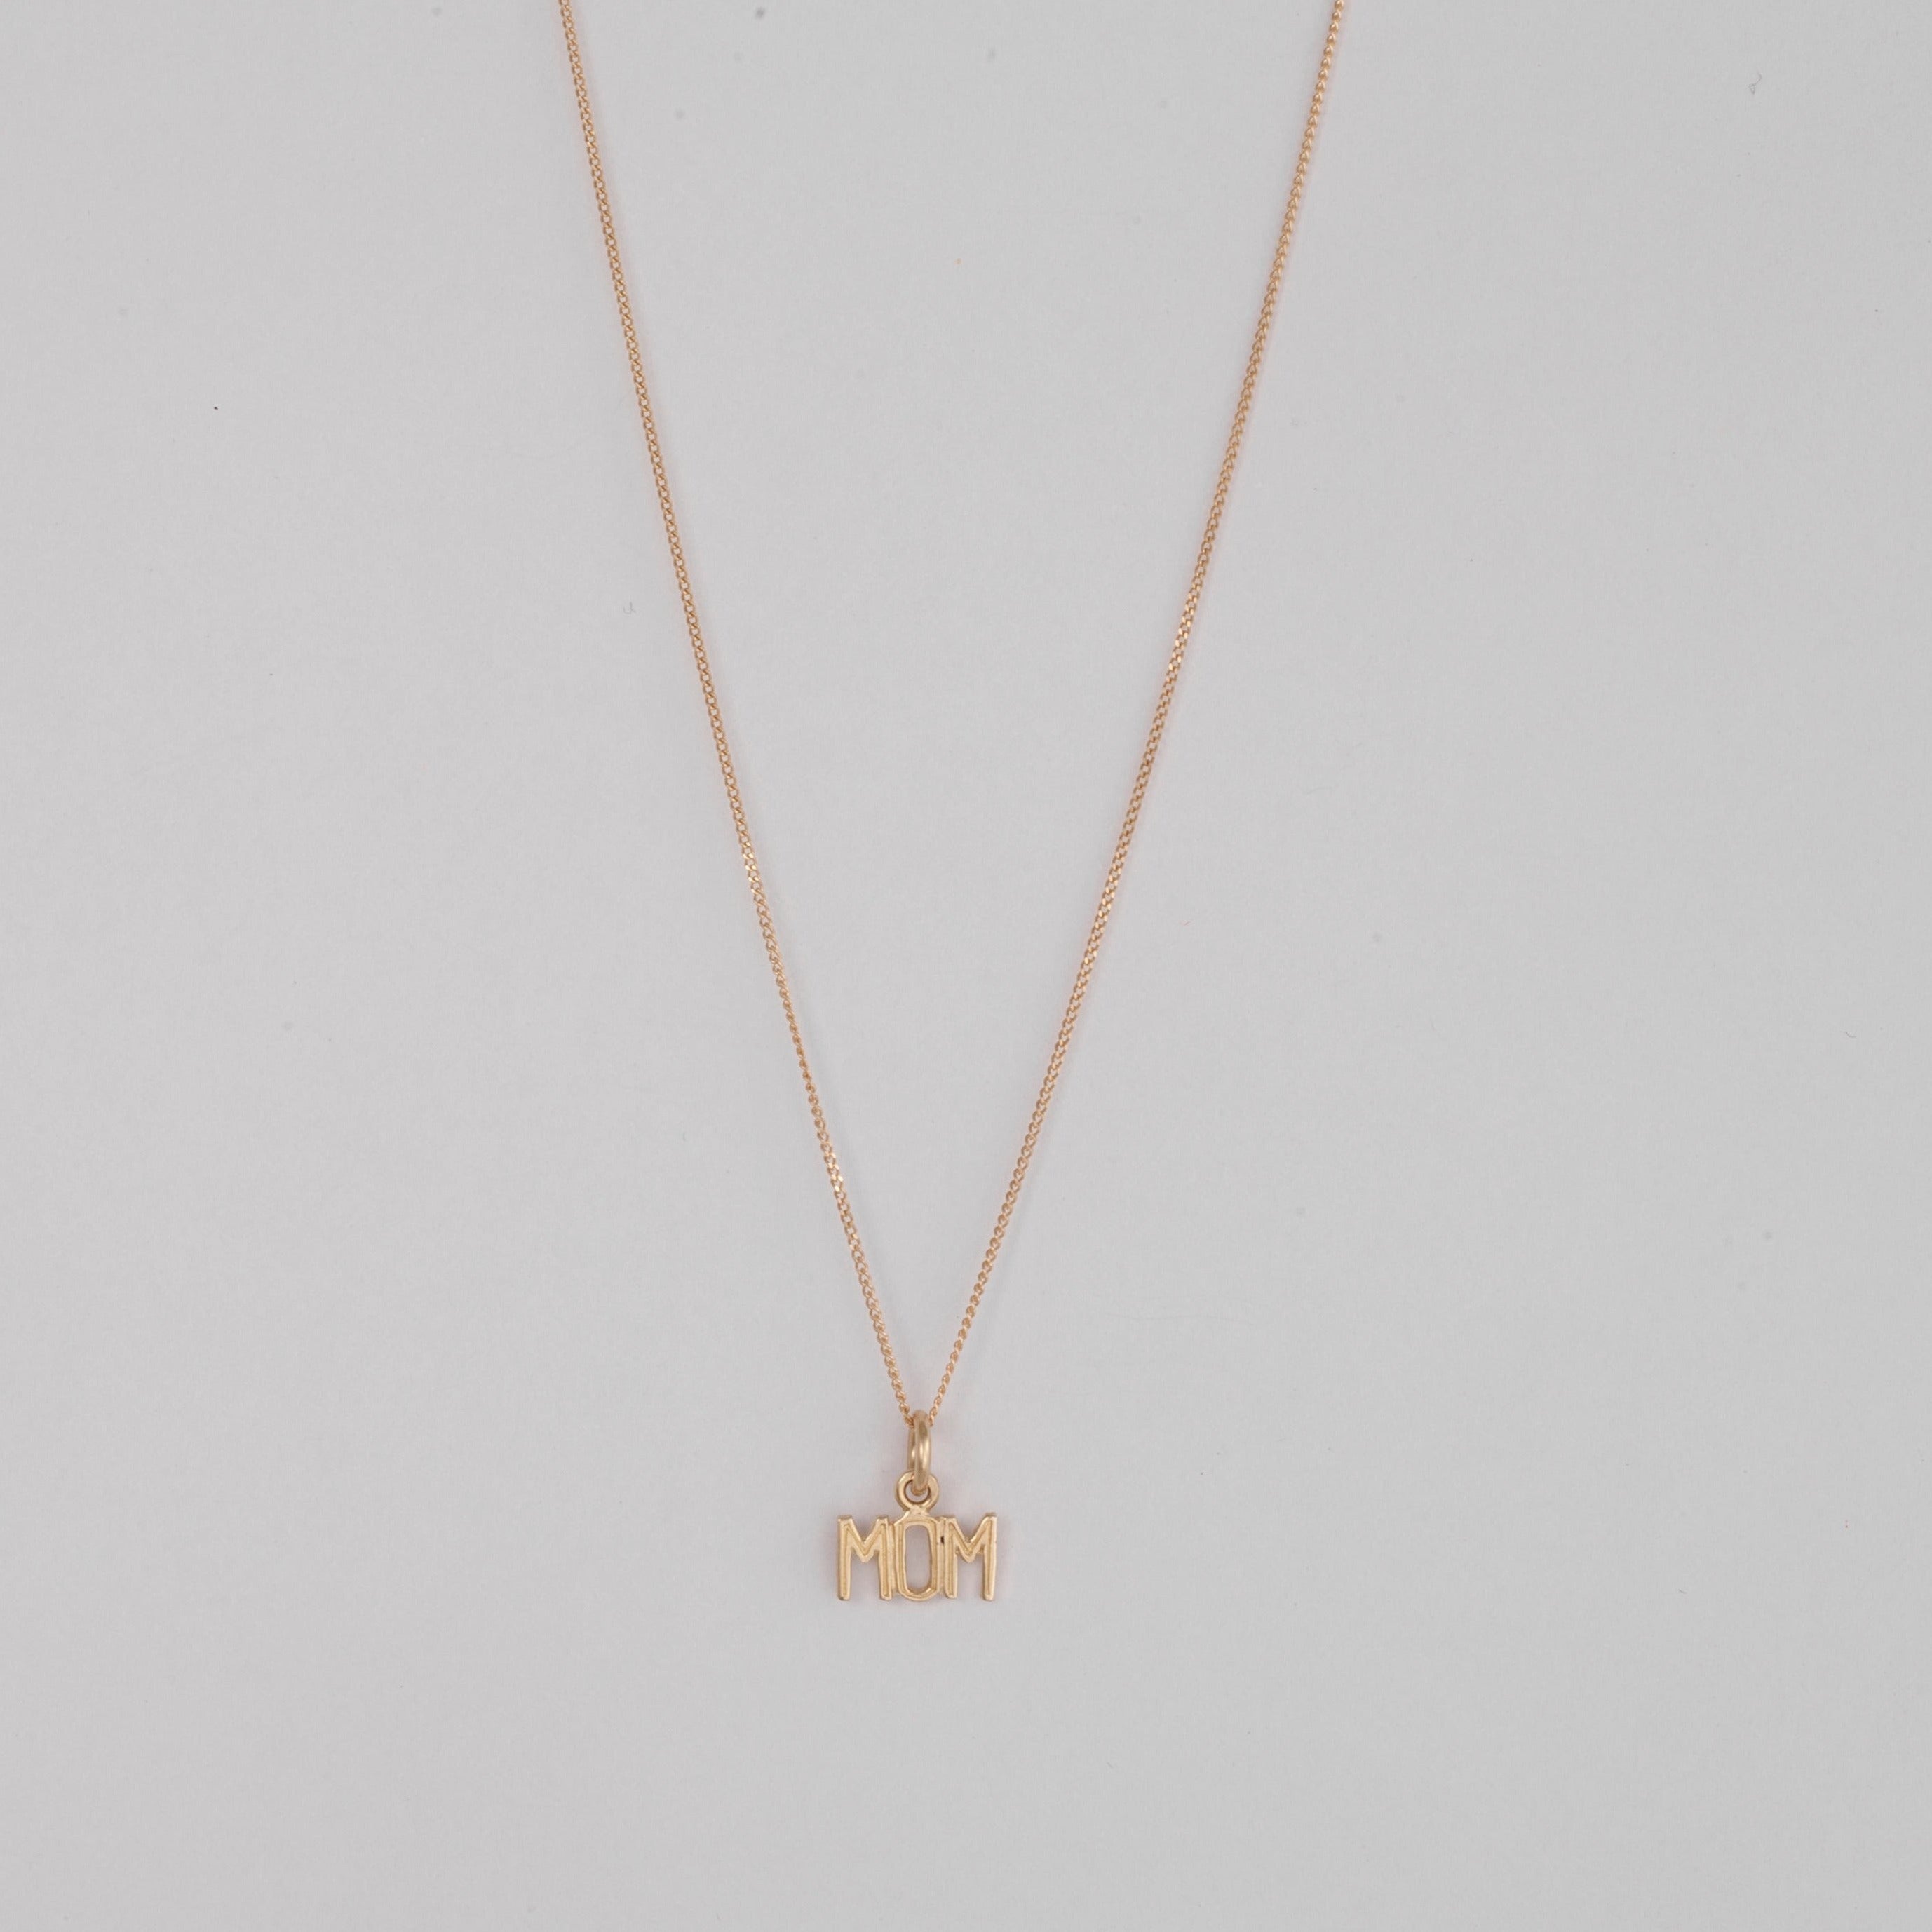 10k Gold MOM pendant on a thin curb chain